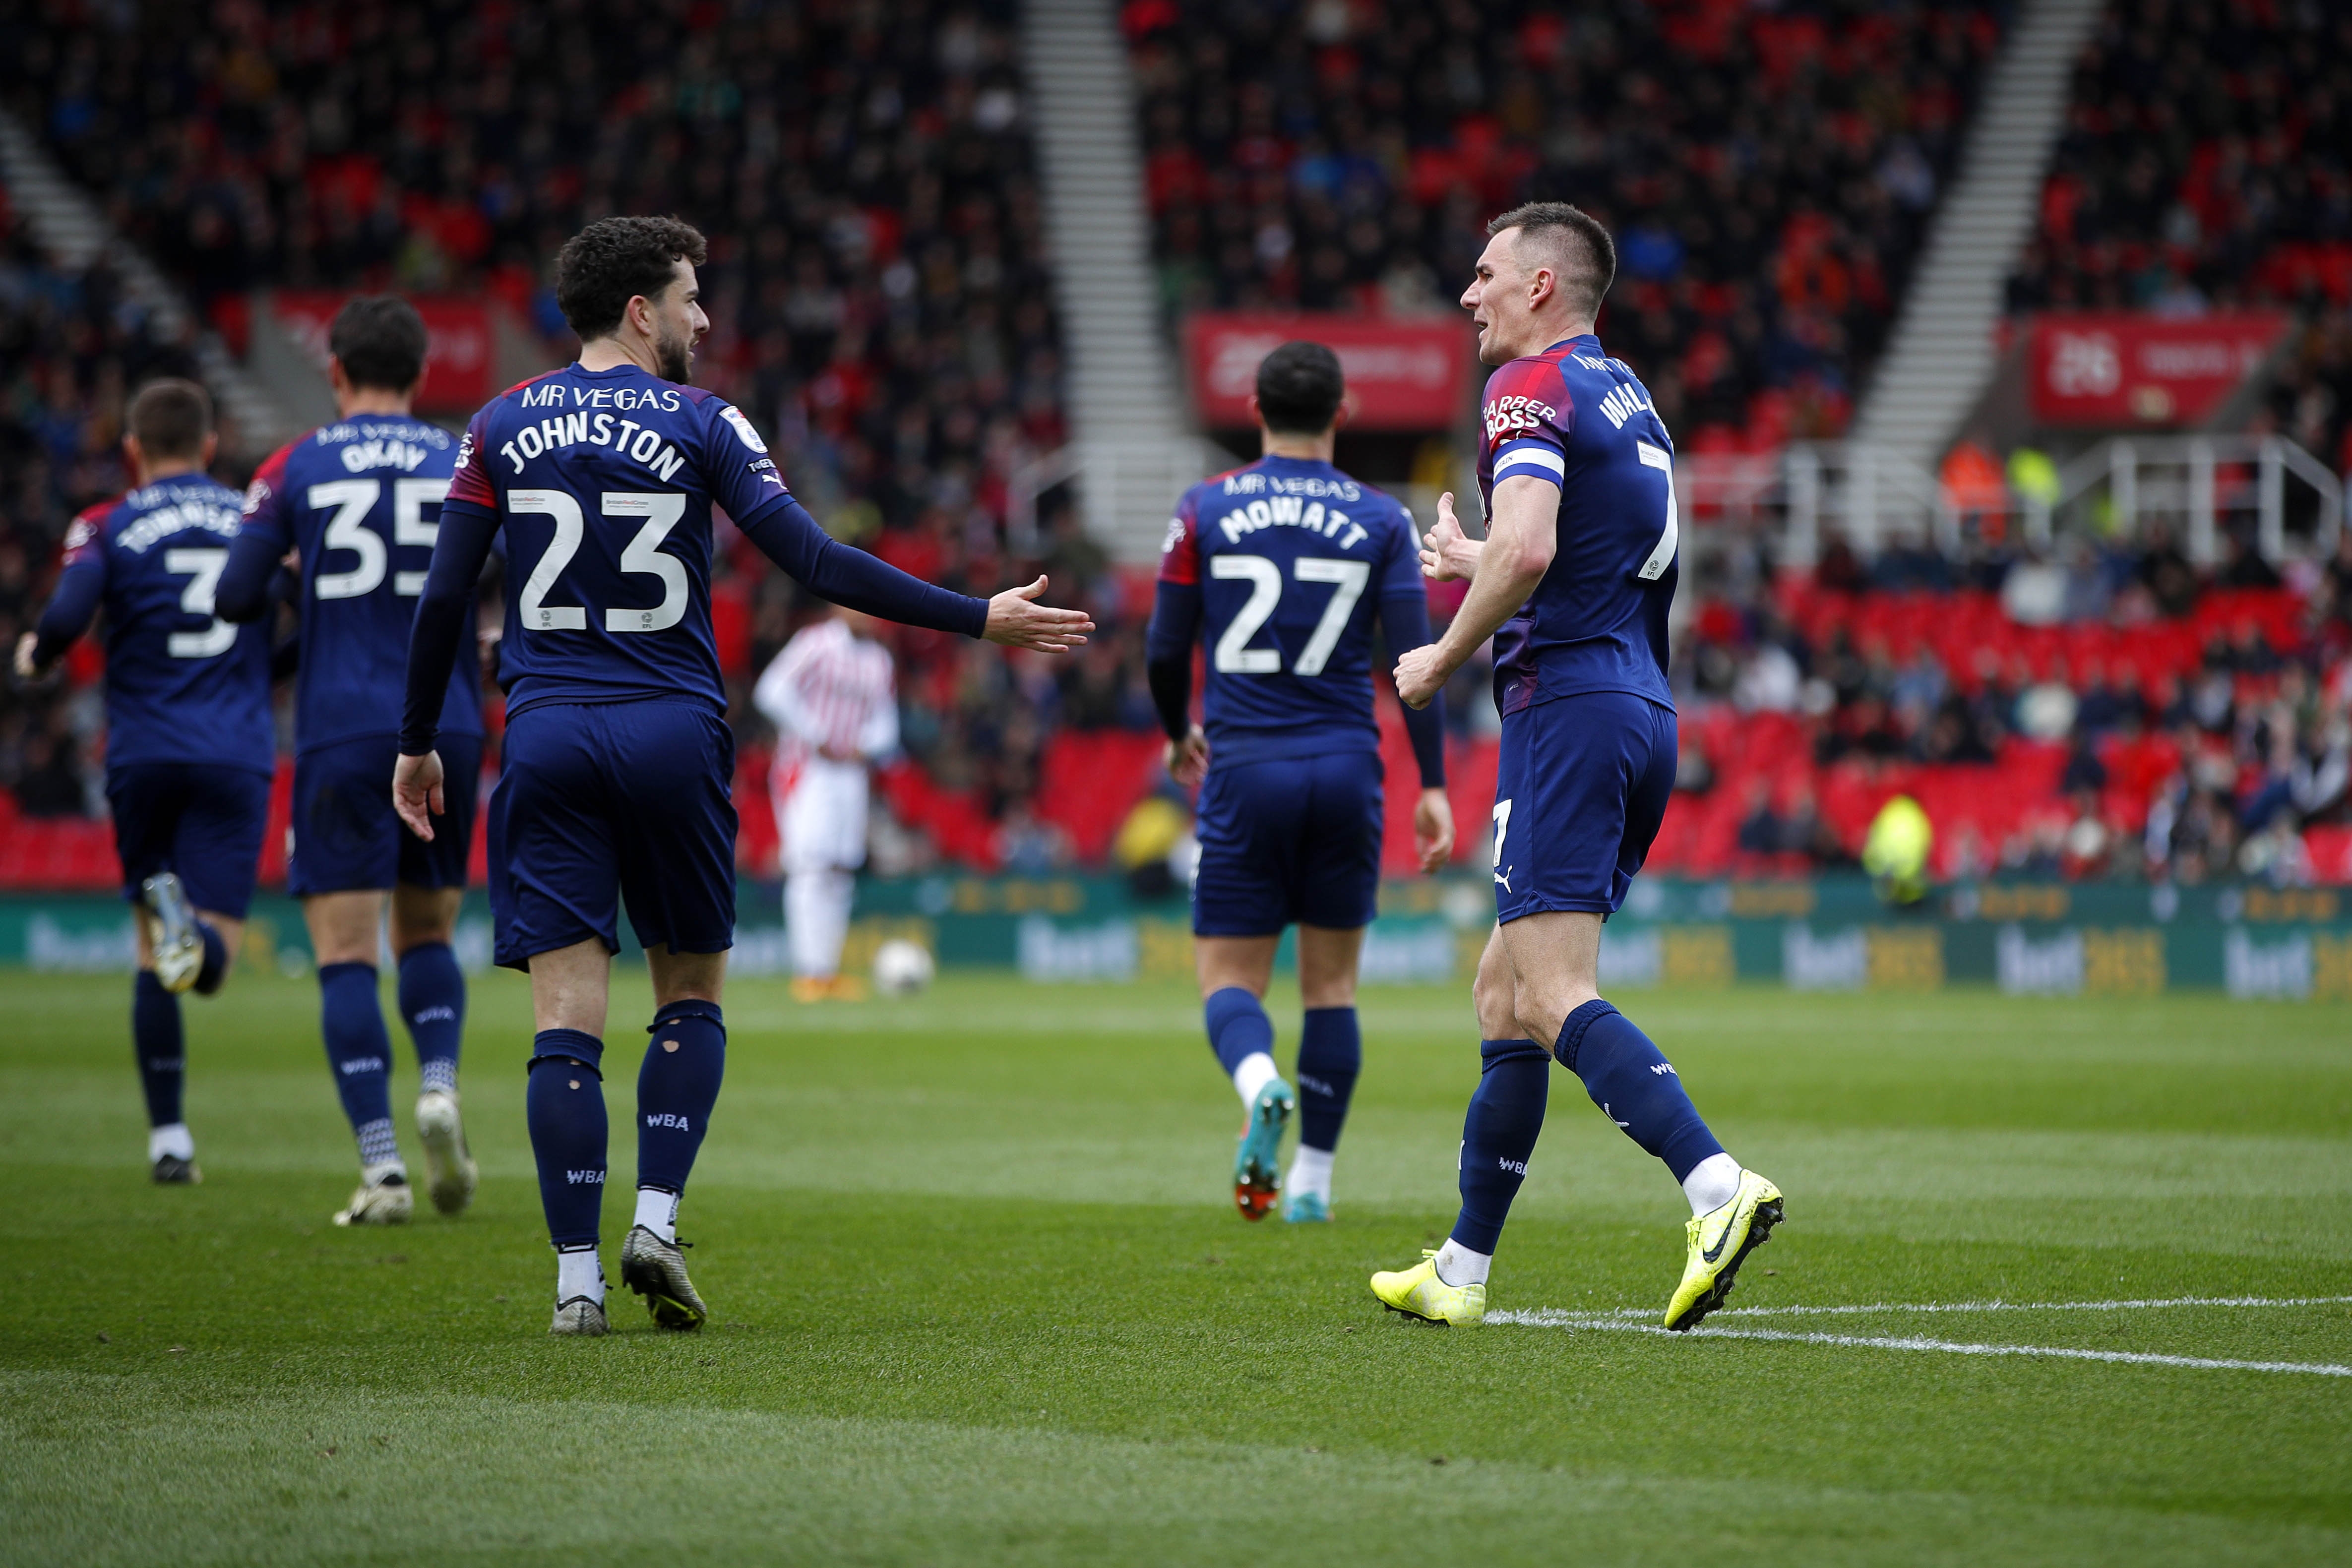 Mikey Johnston and Jed Wallace celebrate the latter's goal at Stoke City while wearing the navy blue and red away kit